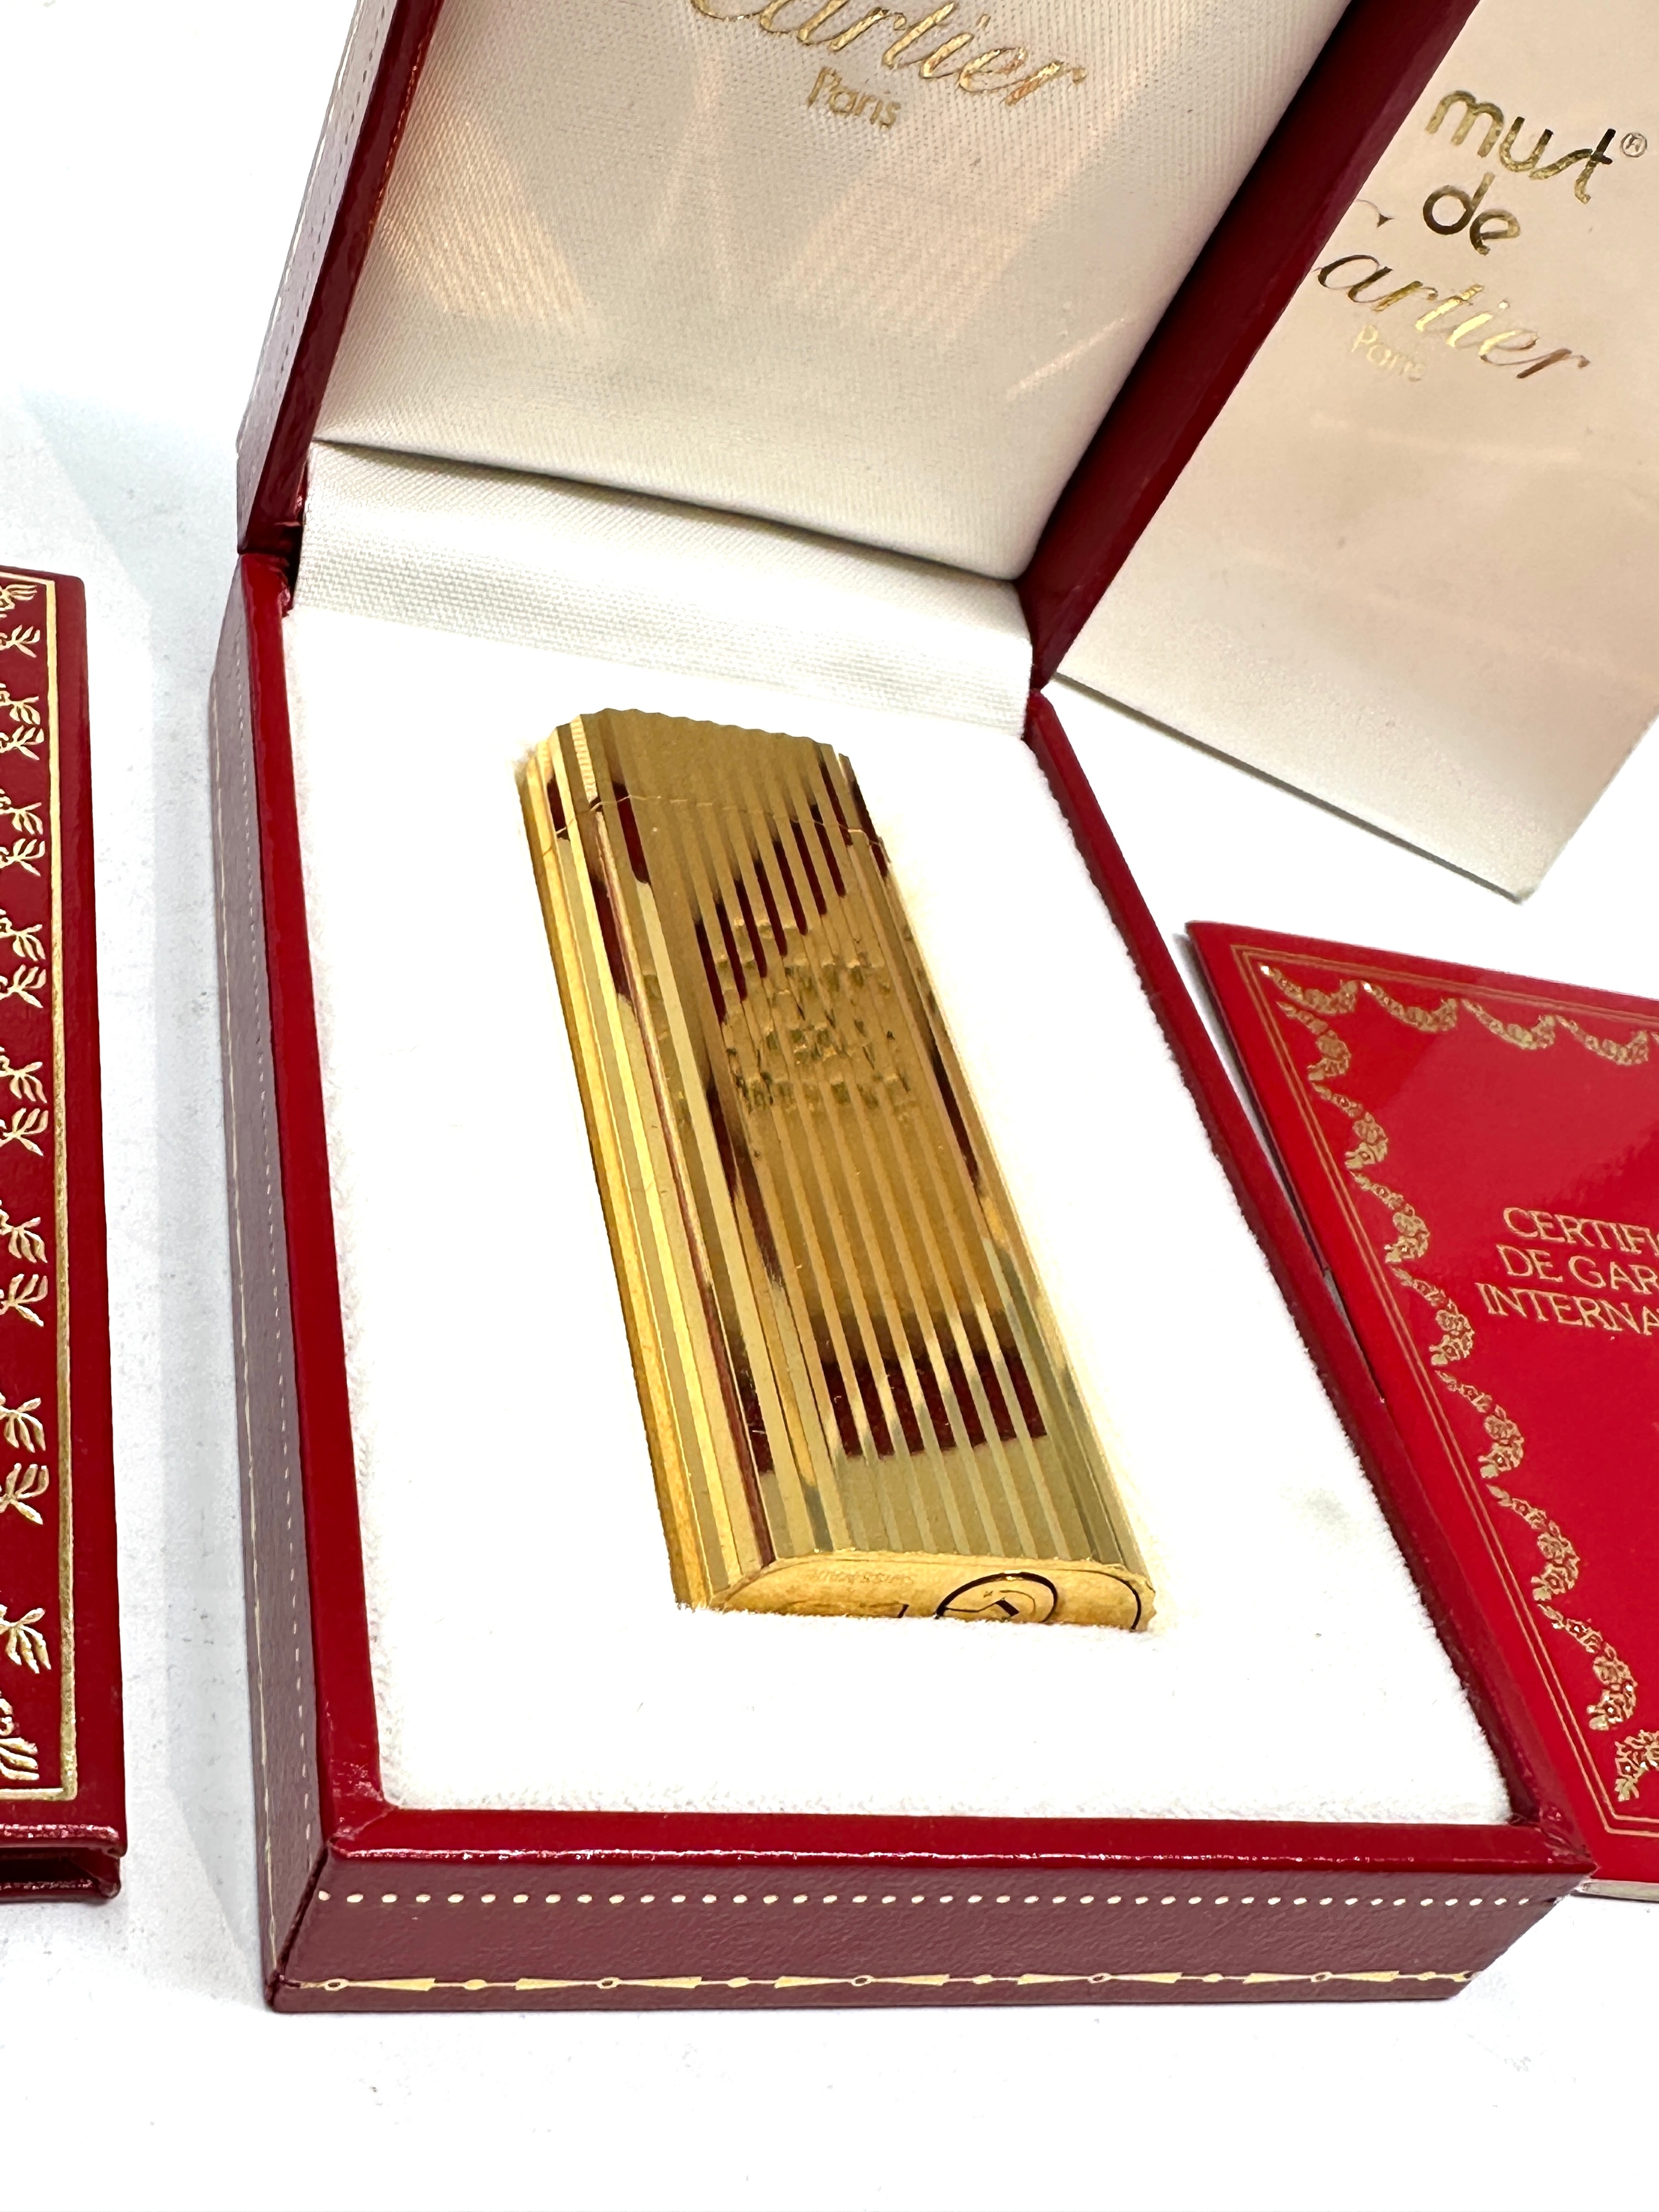 Original boxed Cartier cigarette lighter in as new condition complete with boxes and booklet - Image 2 of 4